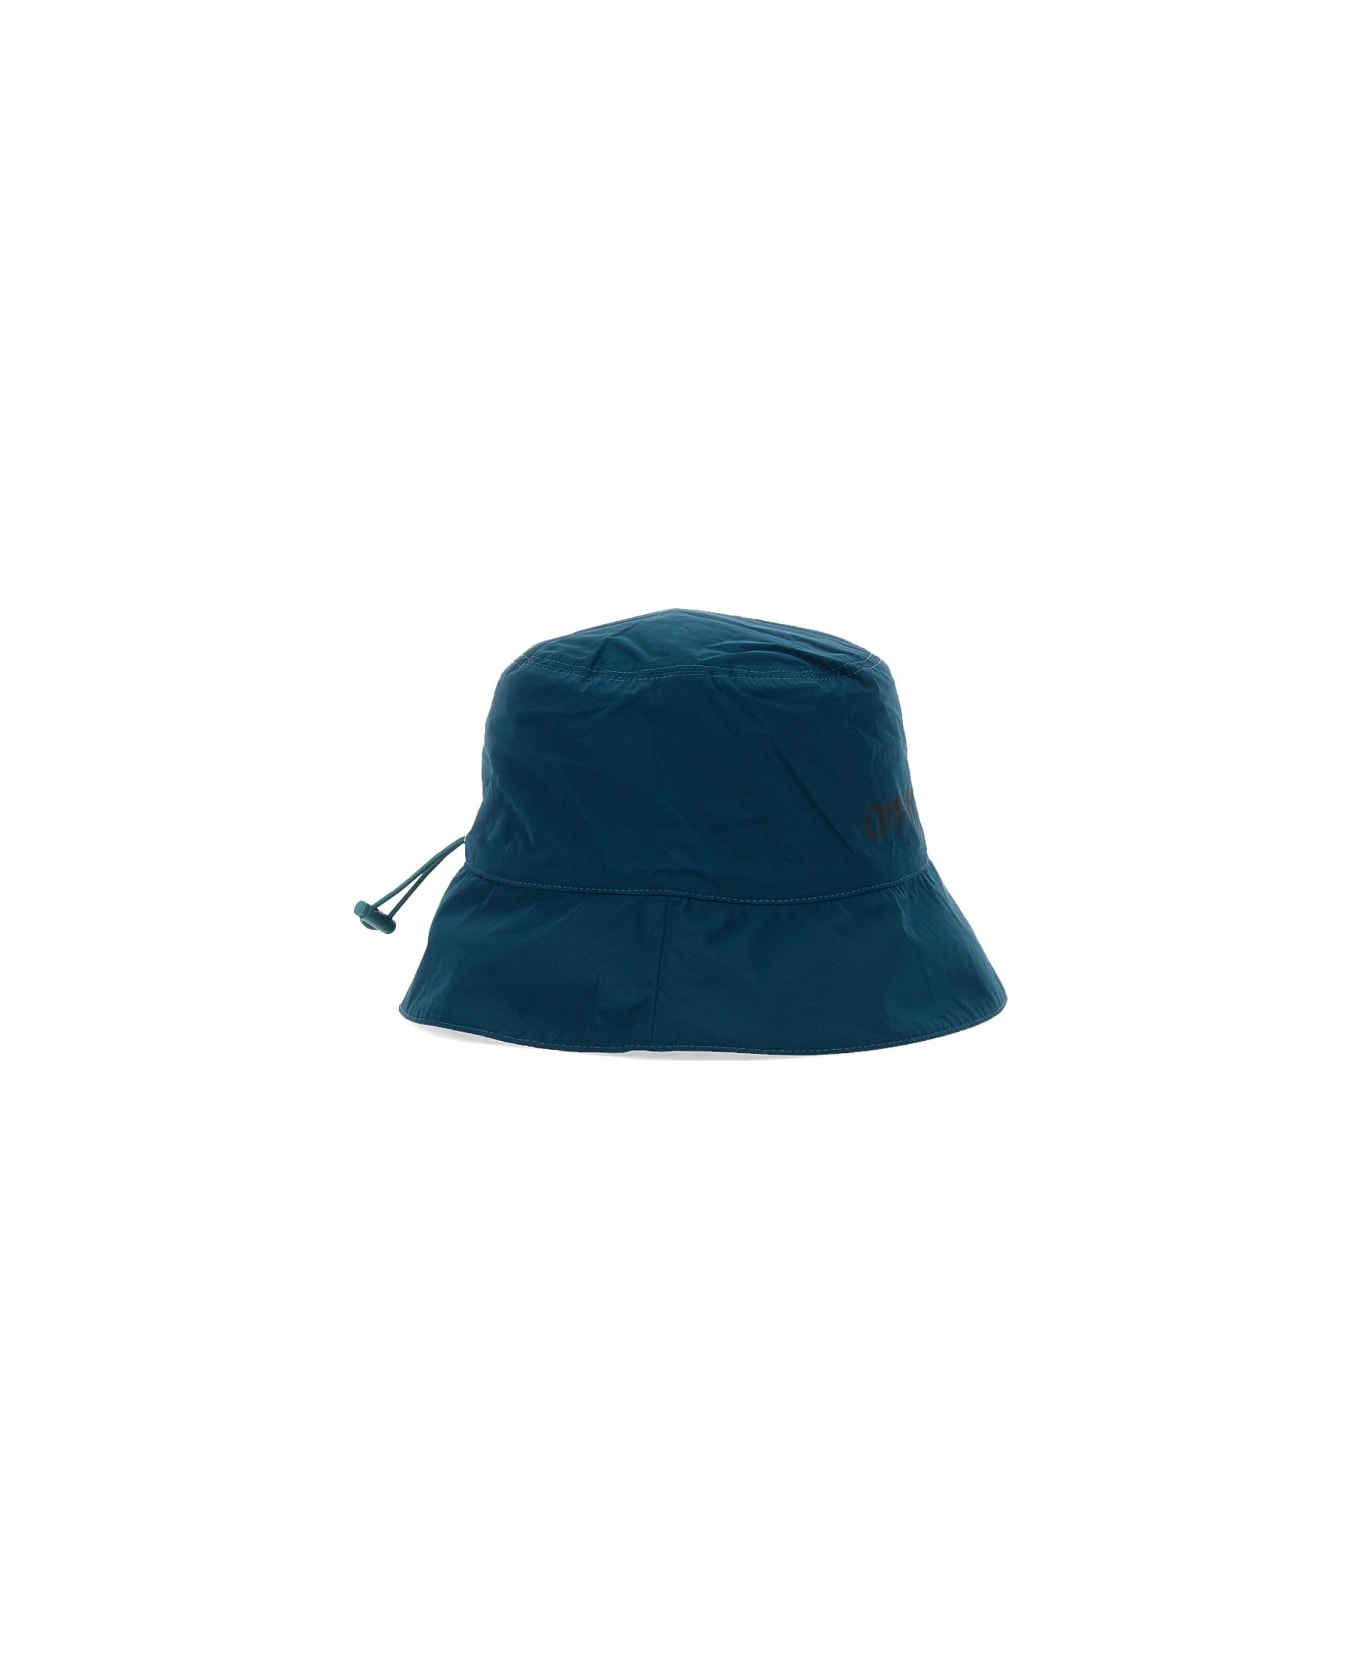 Off-White Bucket Hat With Logo - BLUE 帽子